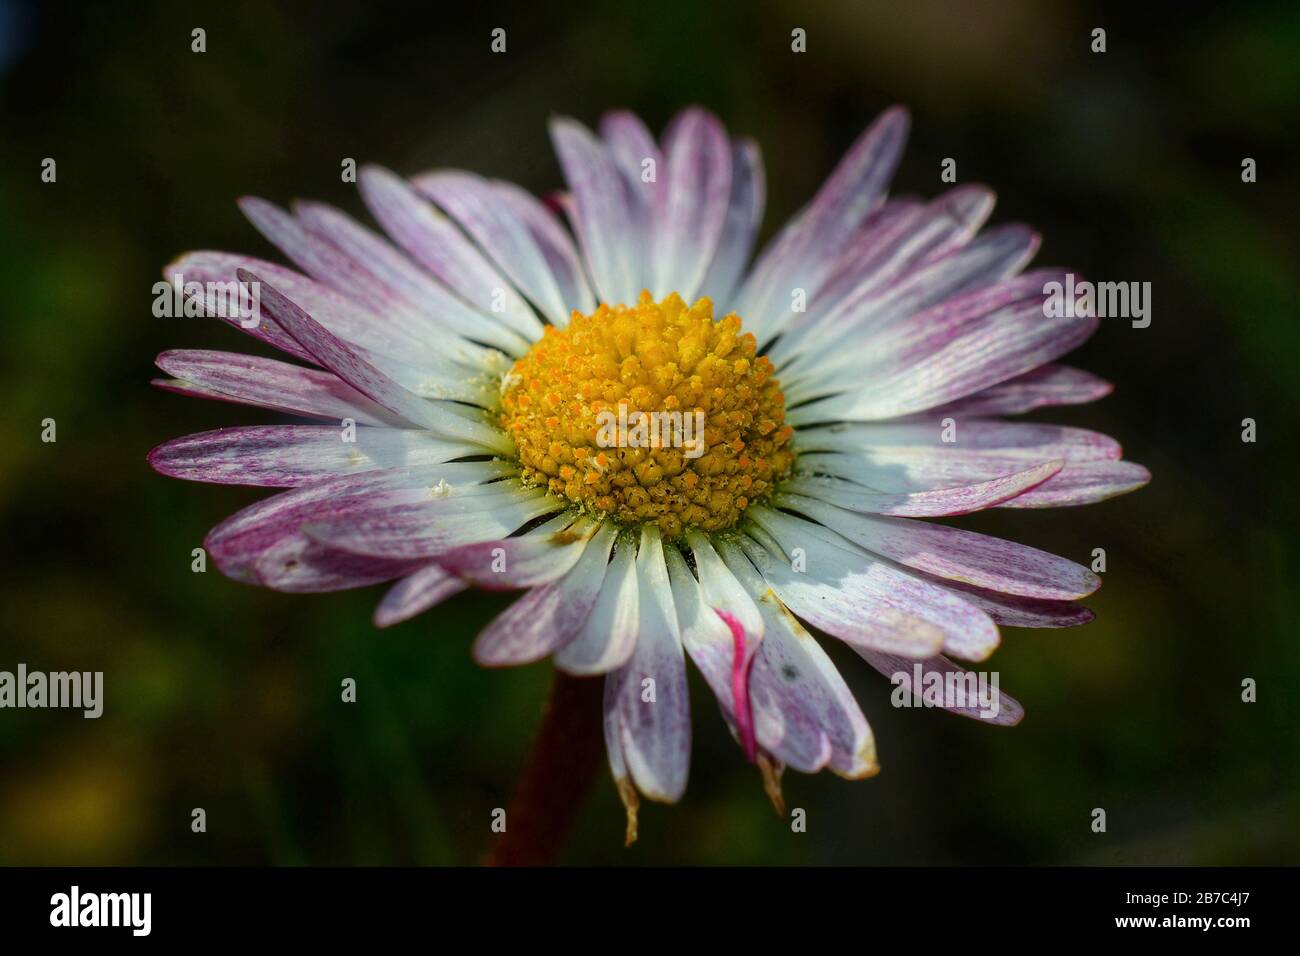 close-up of white and pink daisy flower with its yellow stamens in evidence Stock Photo